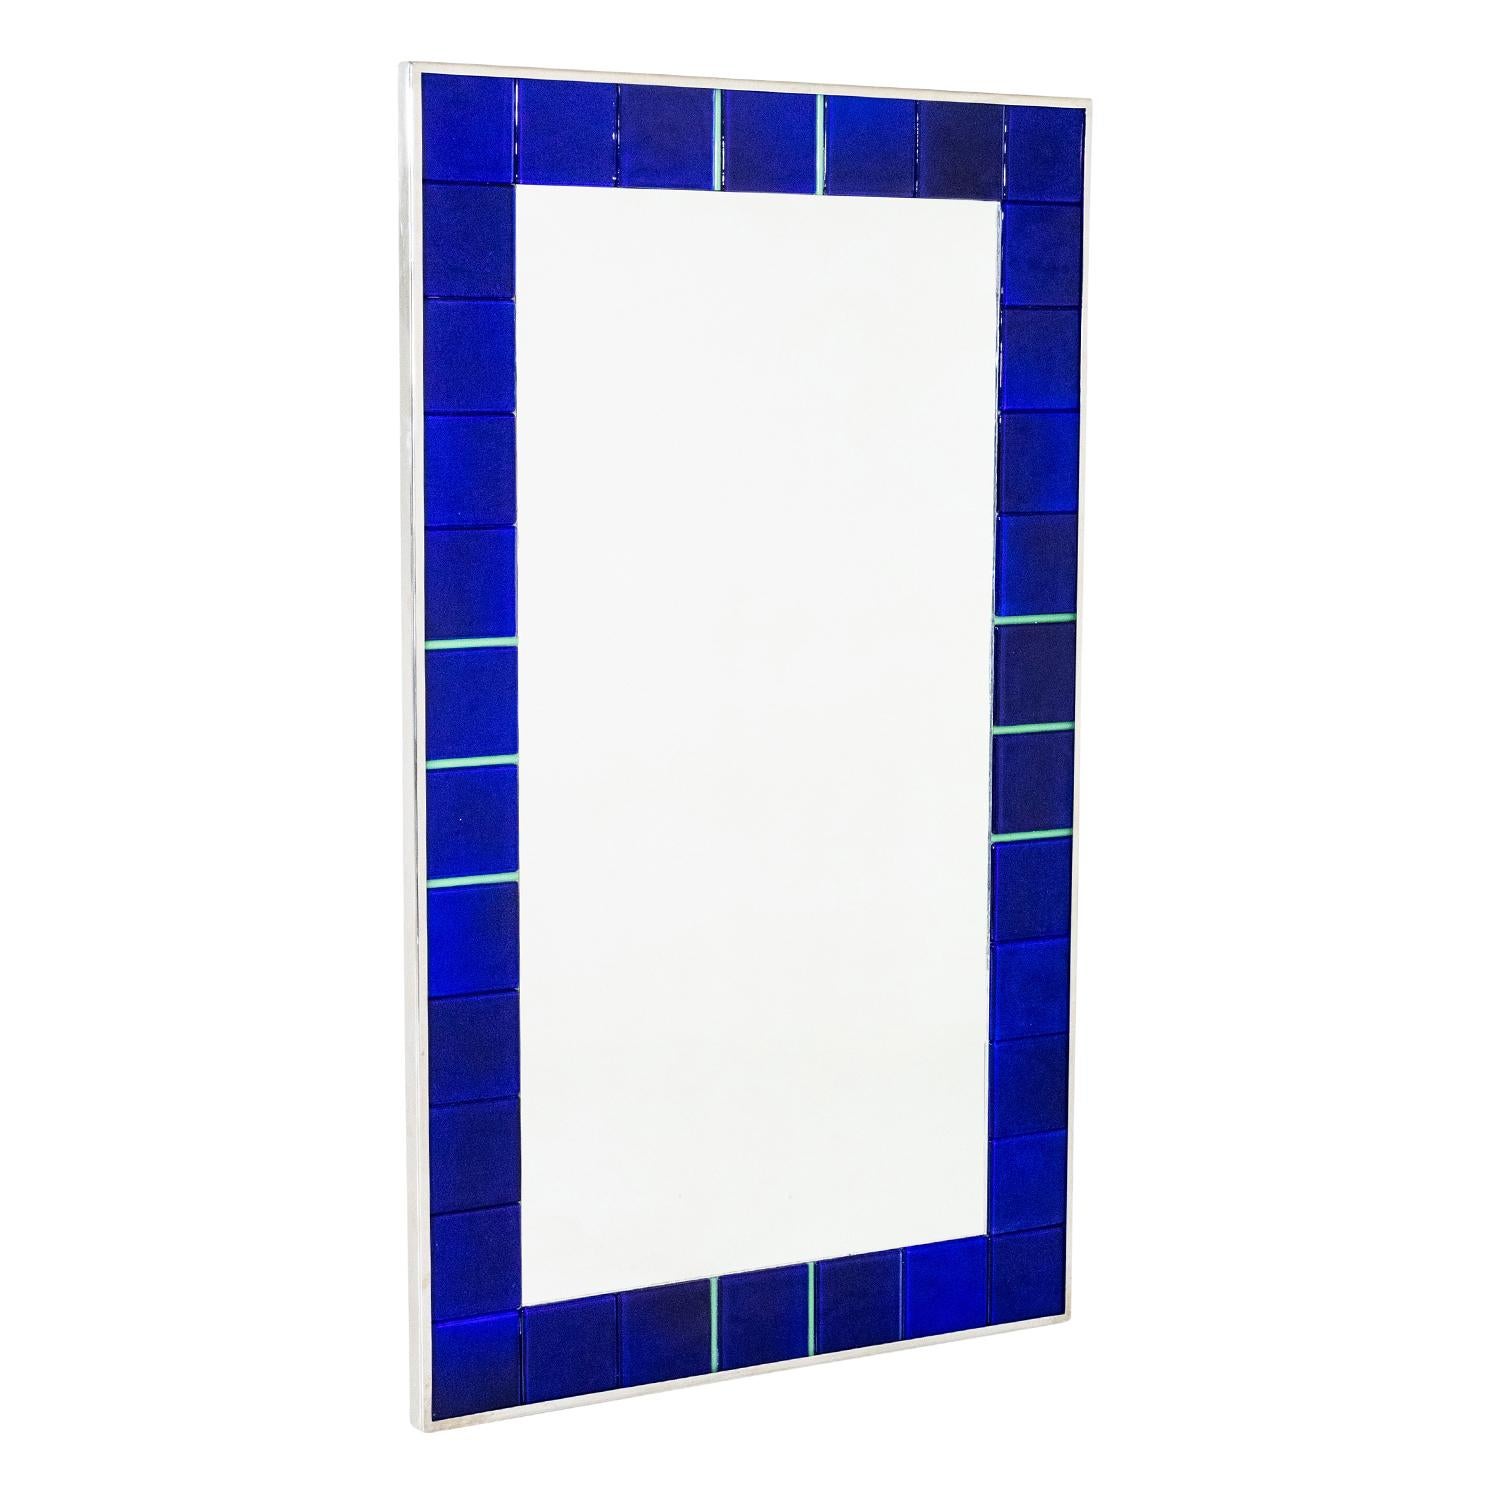 A dark-blue, vintage Mid-Century modern Italian wall mirror made of hand crafted smooth metal and cut glass with its original mirror glass, designed by Paolo Venini in good condition. The wide border of the décor piece is enhanced by detailed